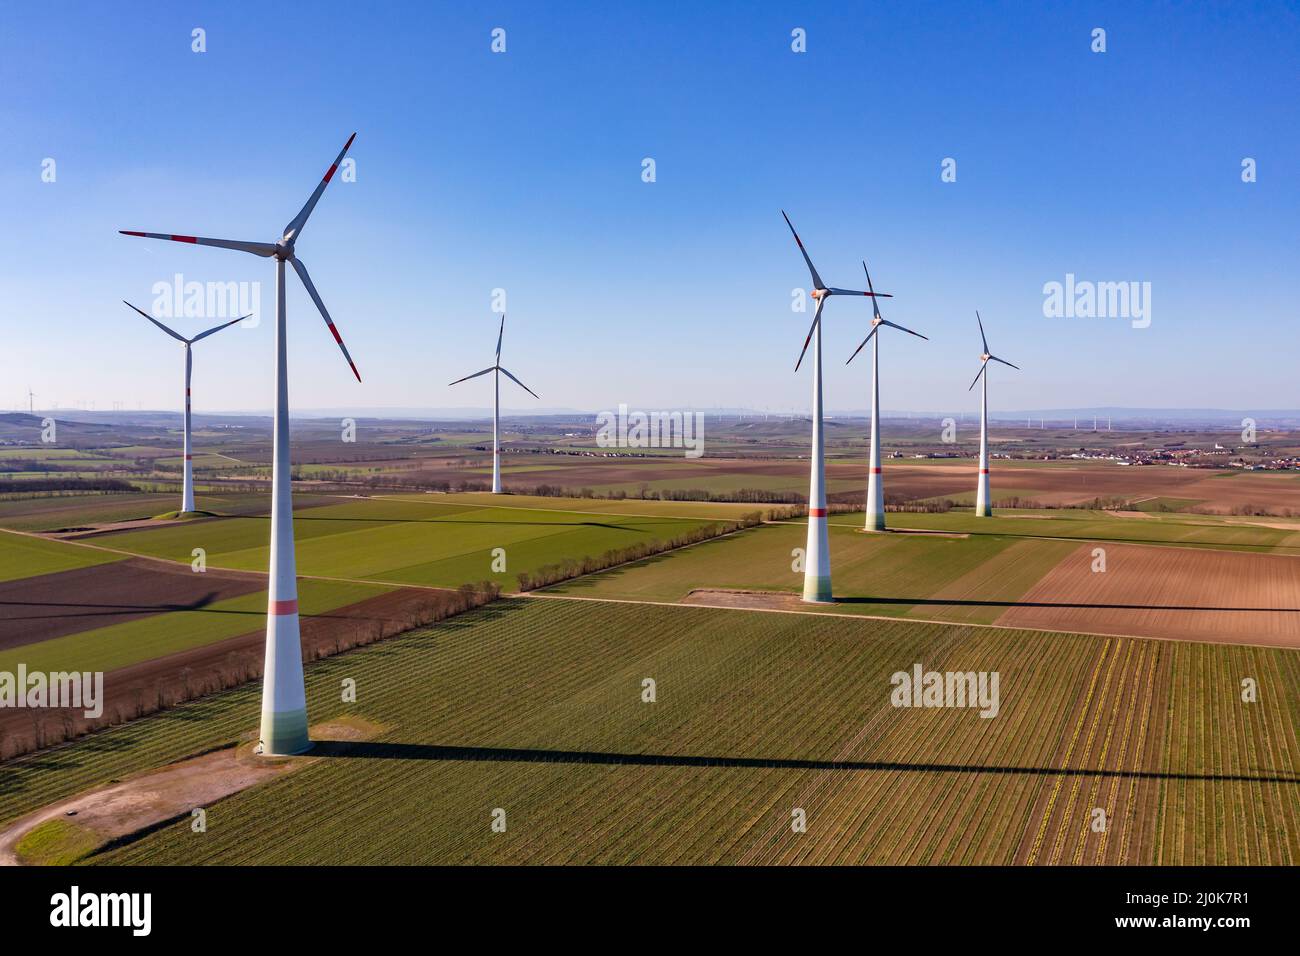 Wind turbines of a wind farm generate electricity for the Energiewende as an aerial view, Germany Stock Photo